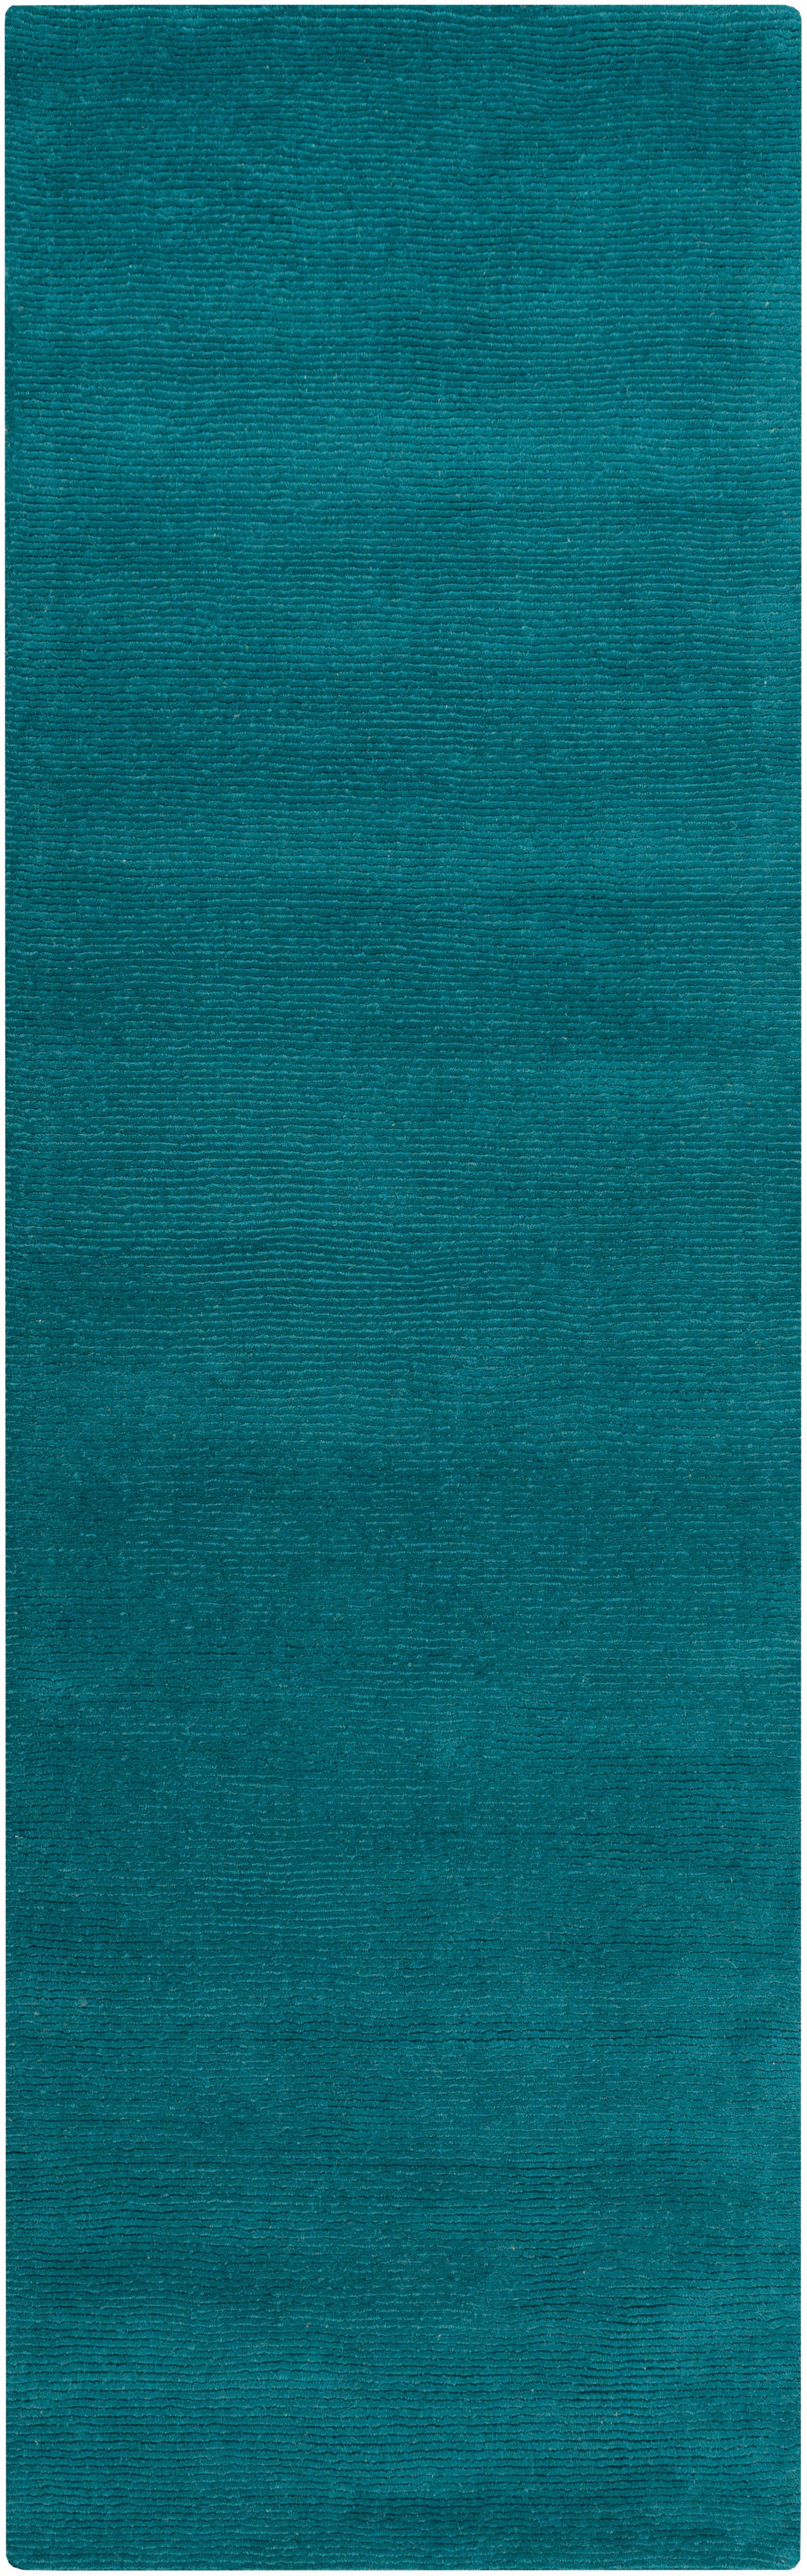 Surya Mystique M5330 Blue Solids and Borders Area Rug